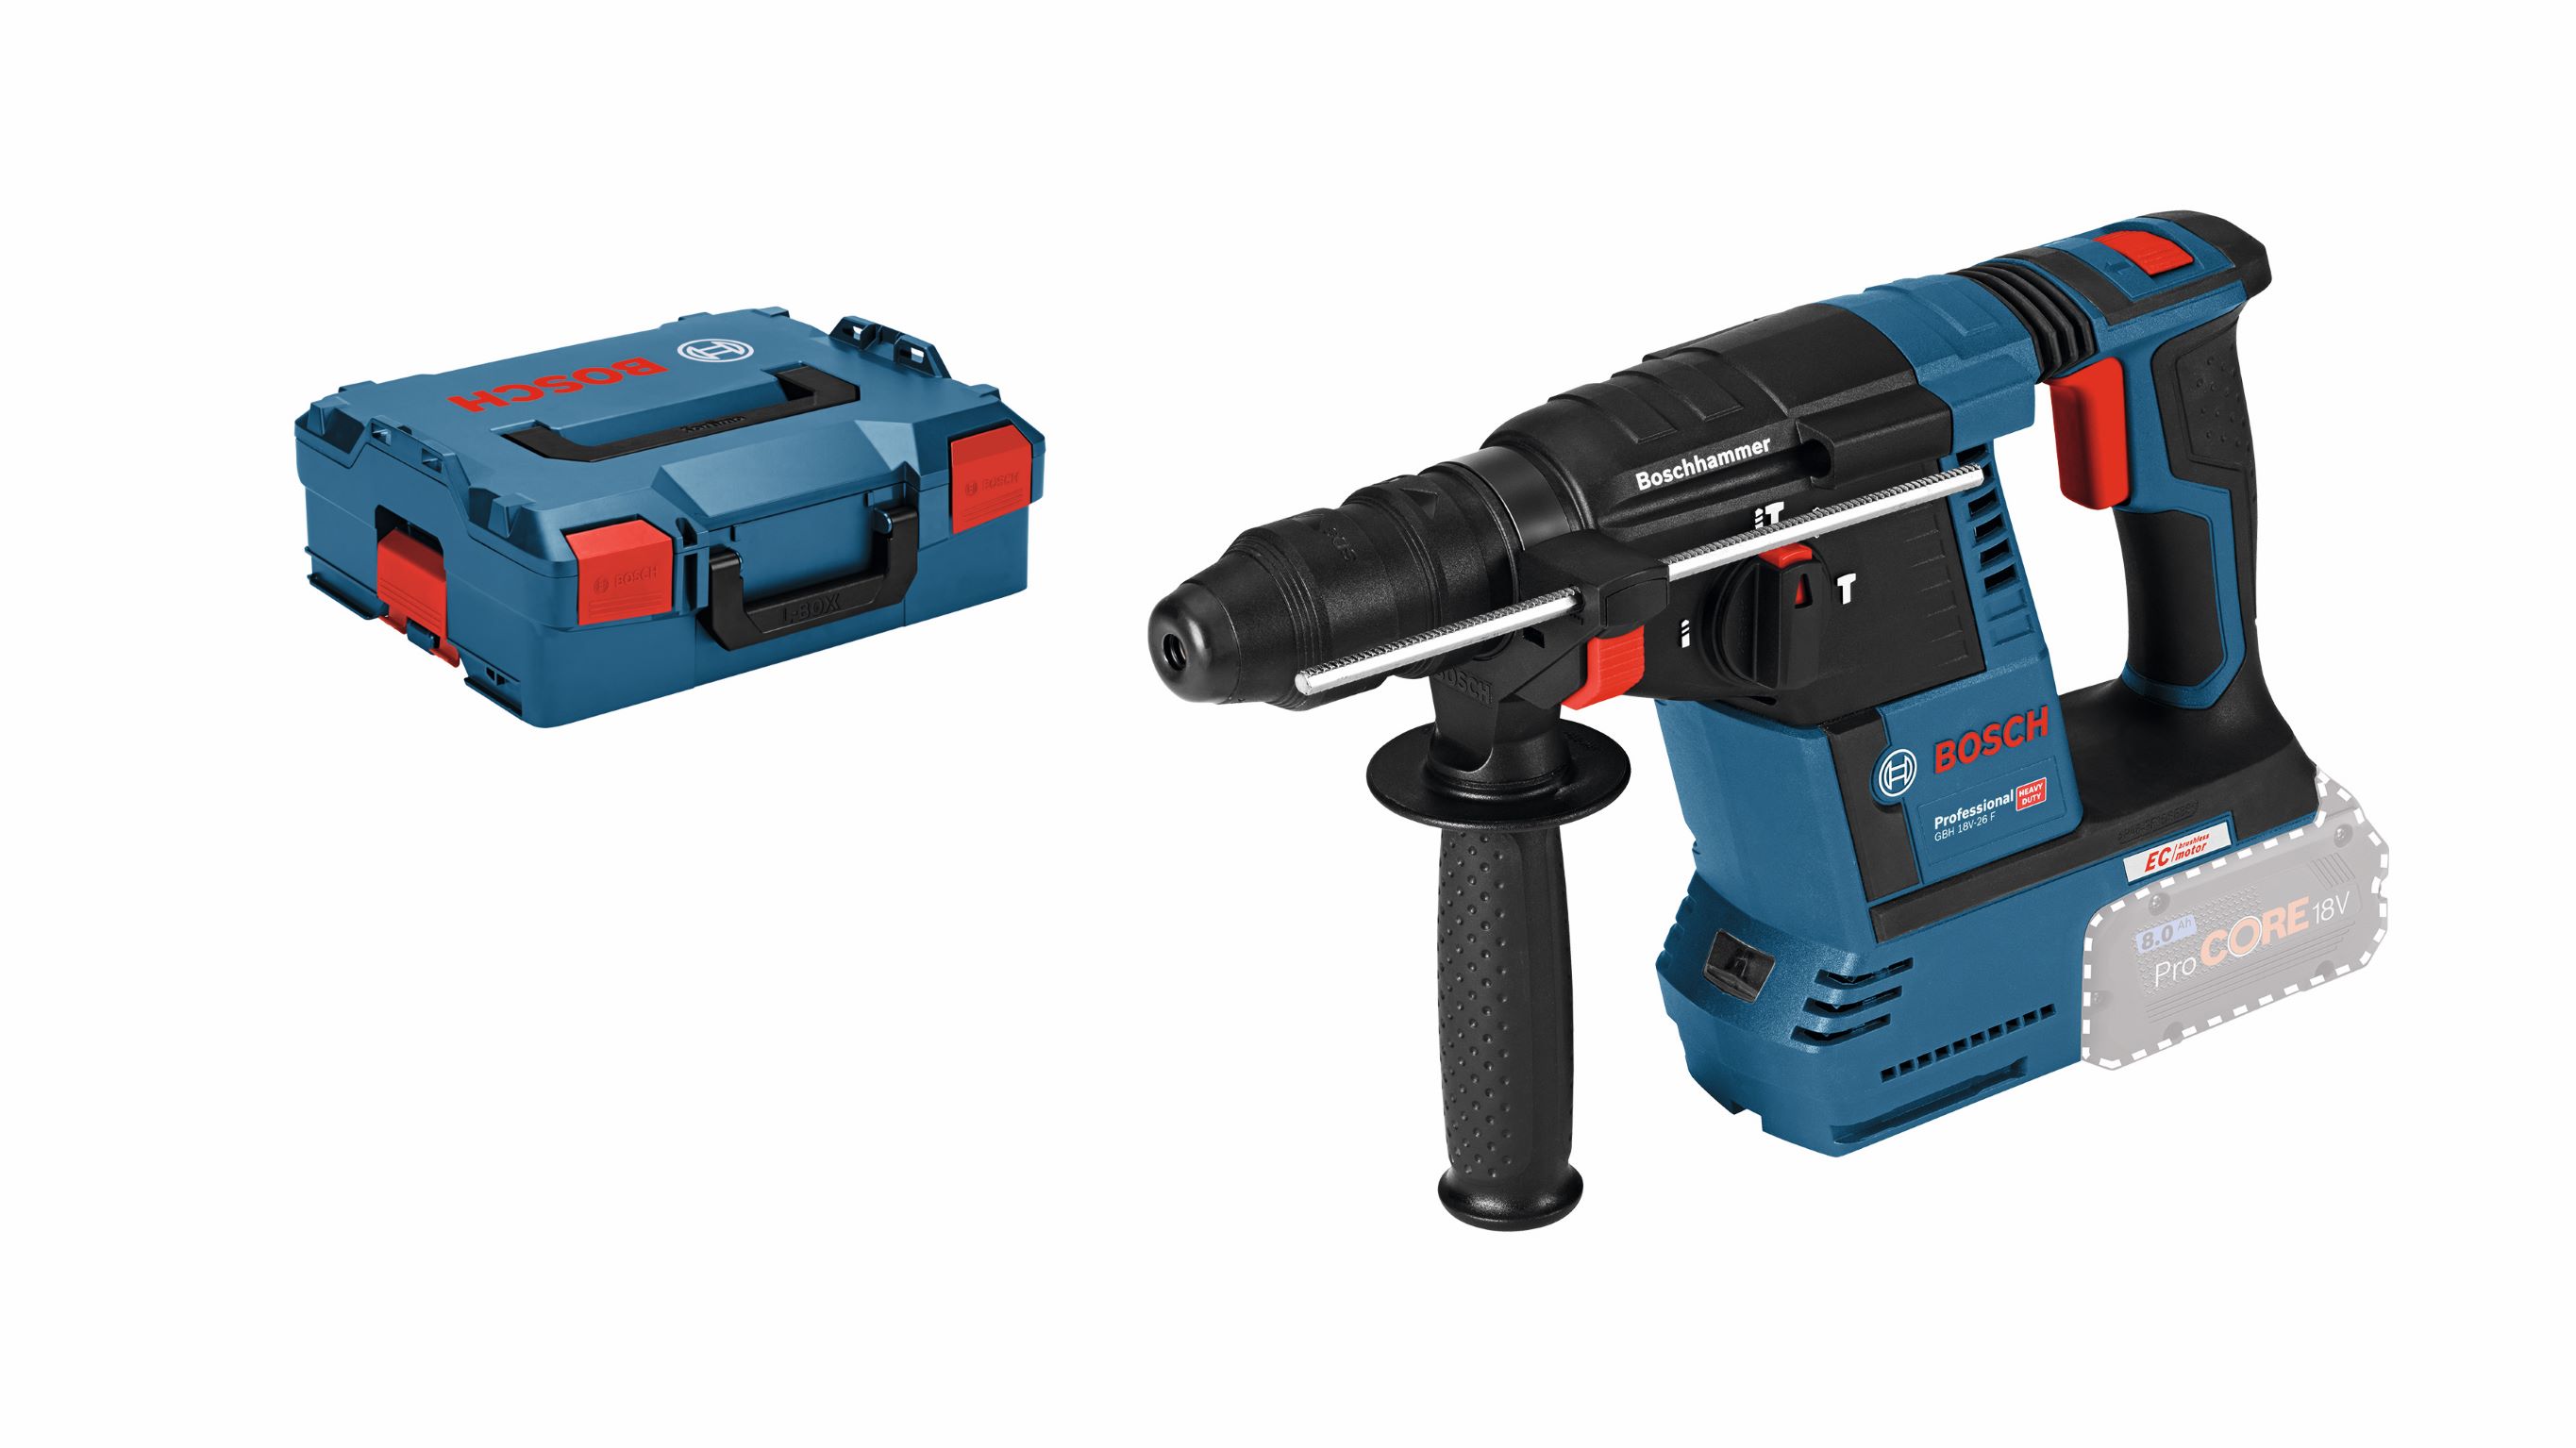 GBH 18V-26 F Professional Cordless Rotary Hammer with SDS Plus Bosch - 2